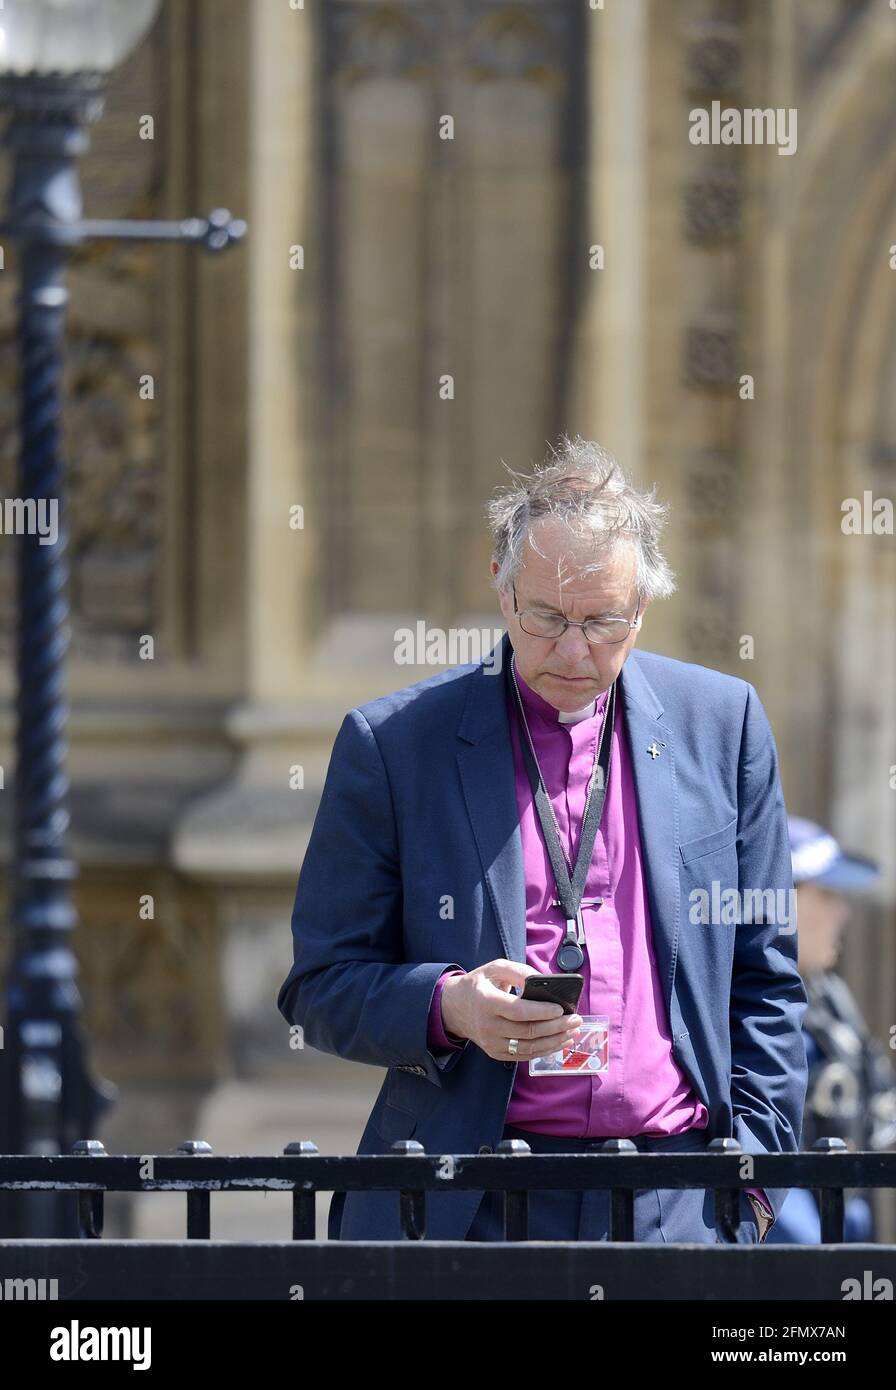 The Right Reverend Paul Butler, Bishop of Durham on his mobile phone outside Parliament after the Queen's Speech at the State Opening, 11th May 2021 Stock Photo